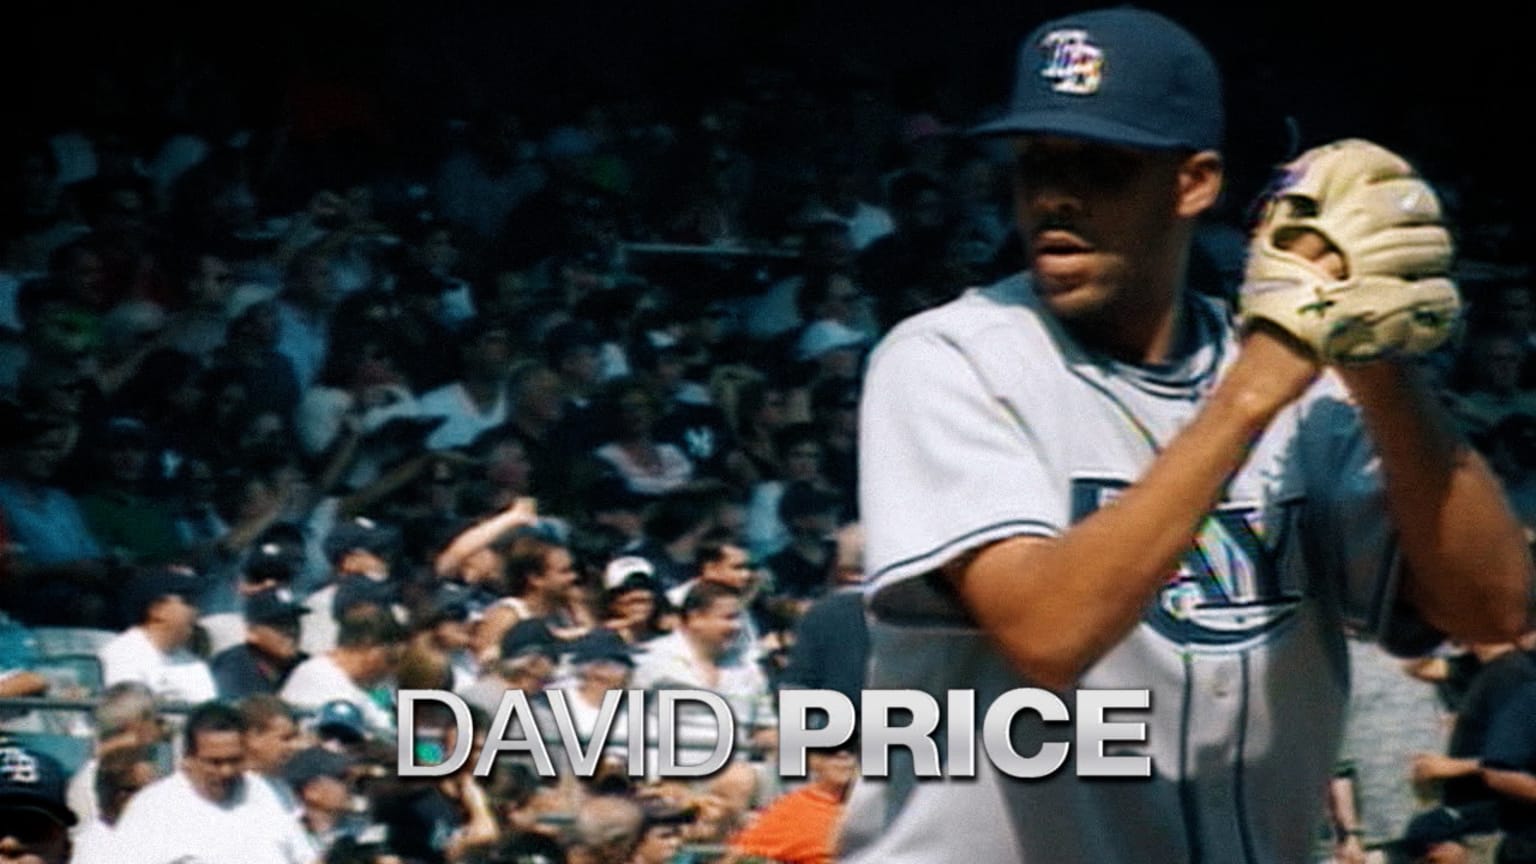 David Price of Tampa Bay Rays responds to criticism from David